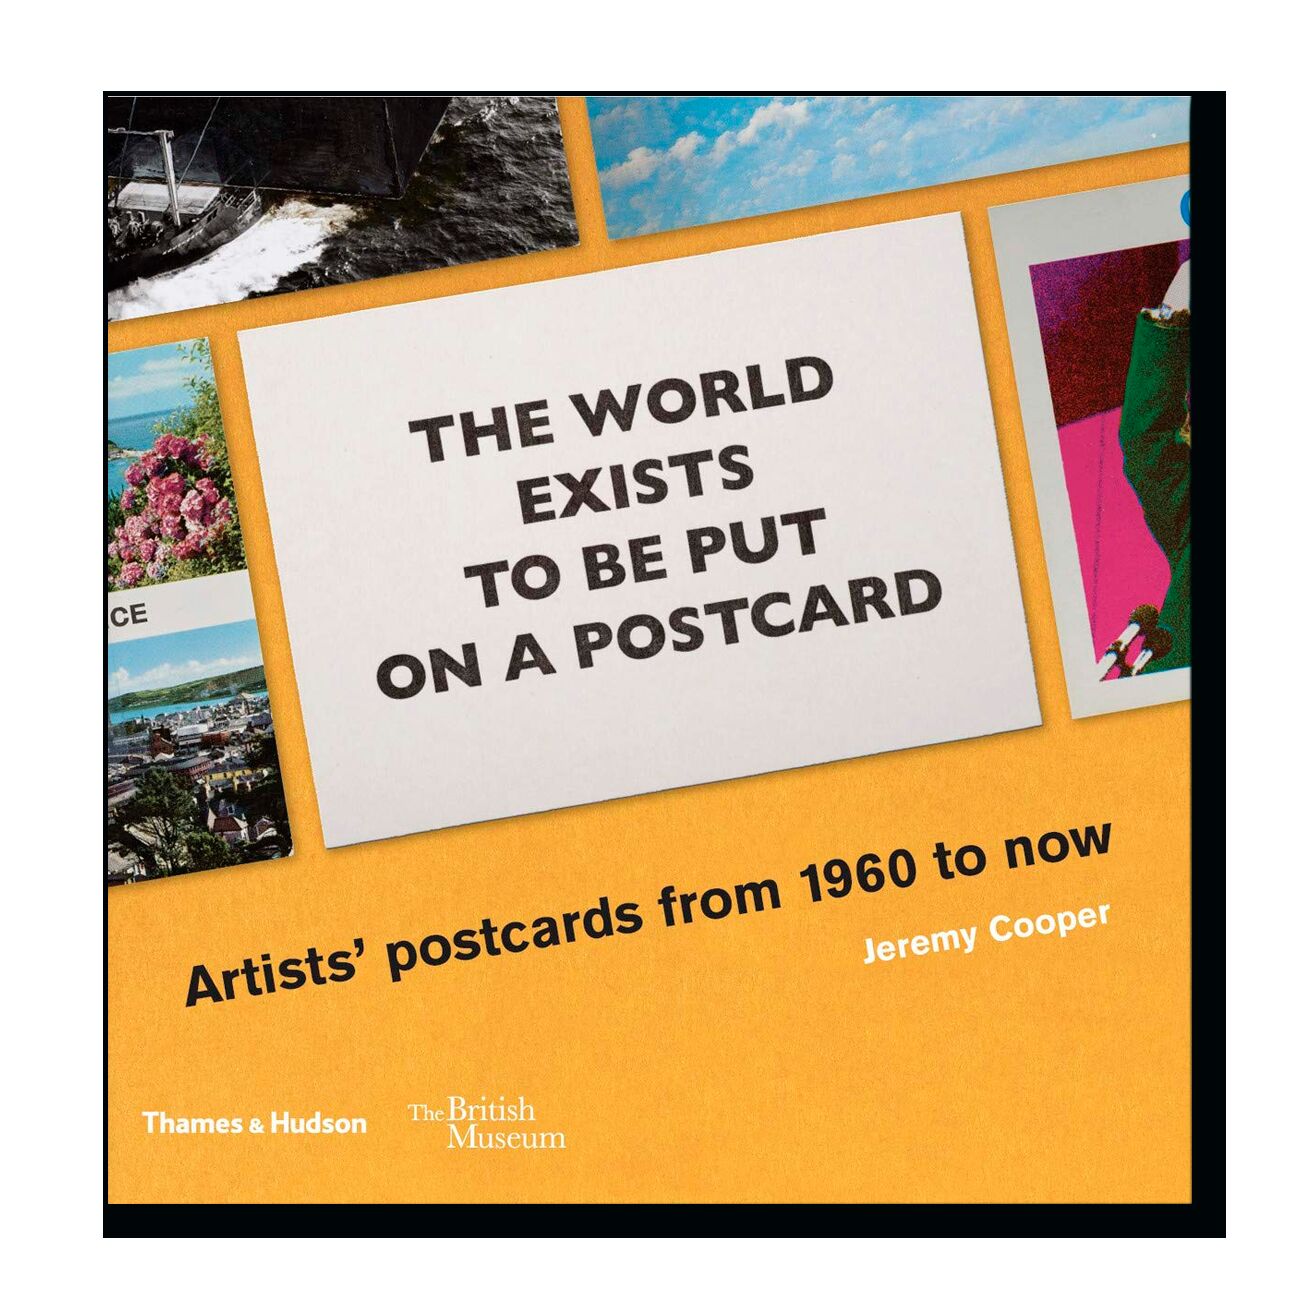 The World Exists to Be Put on a Postcard: Artists' postcards from 1960 to now